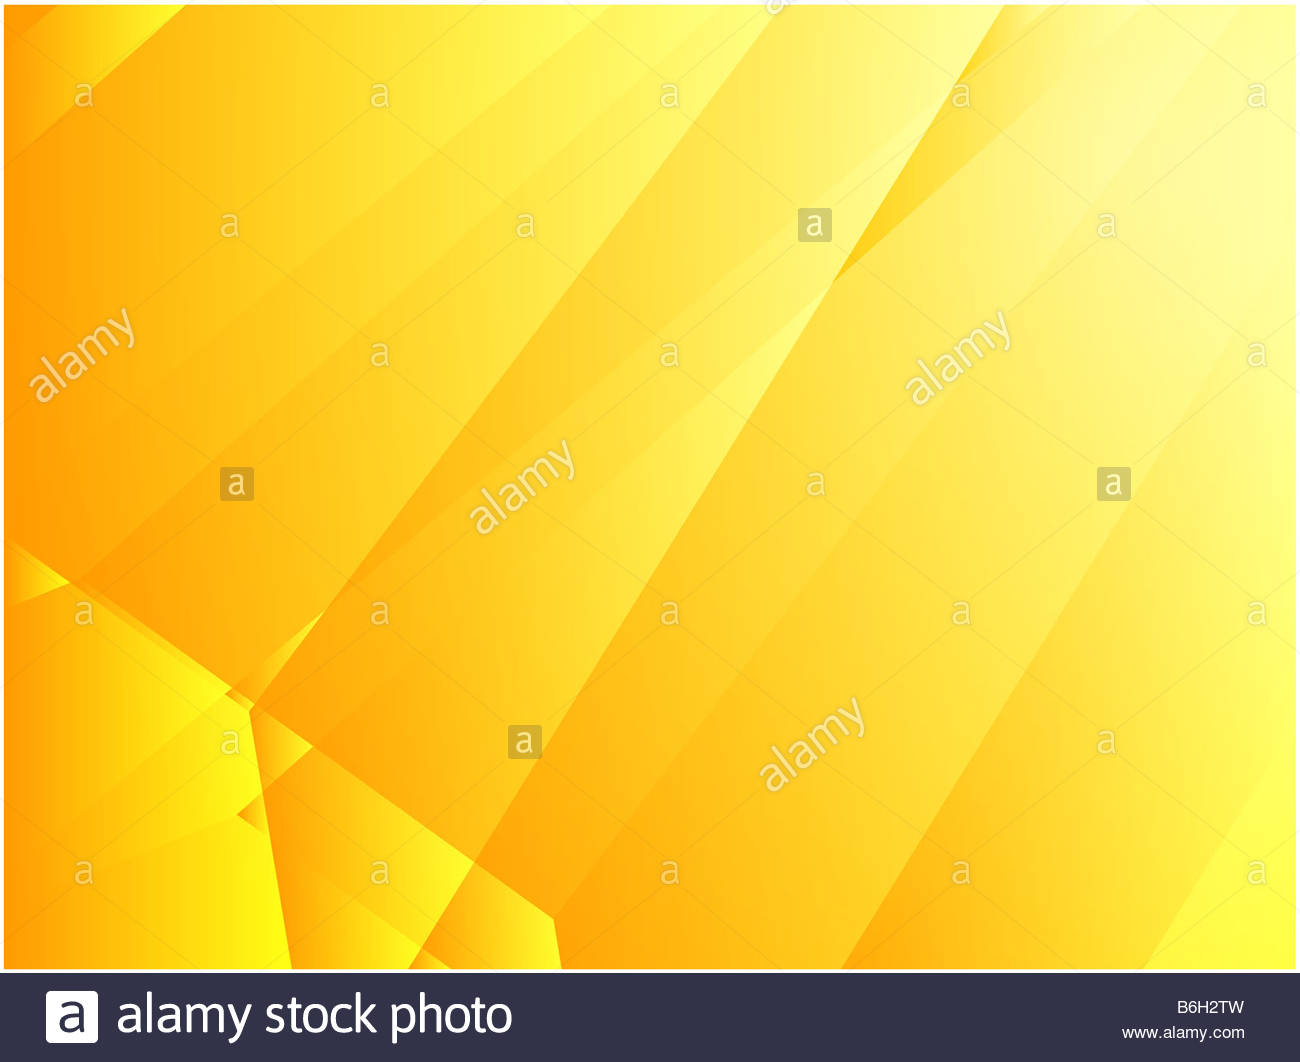 Abstract Wallpaper Design With Smooth Angular Crystalline